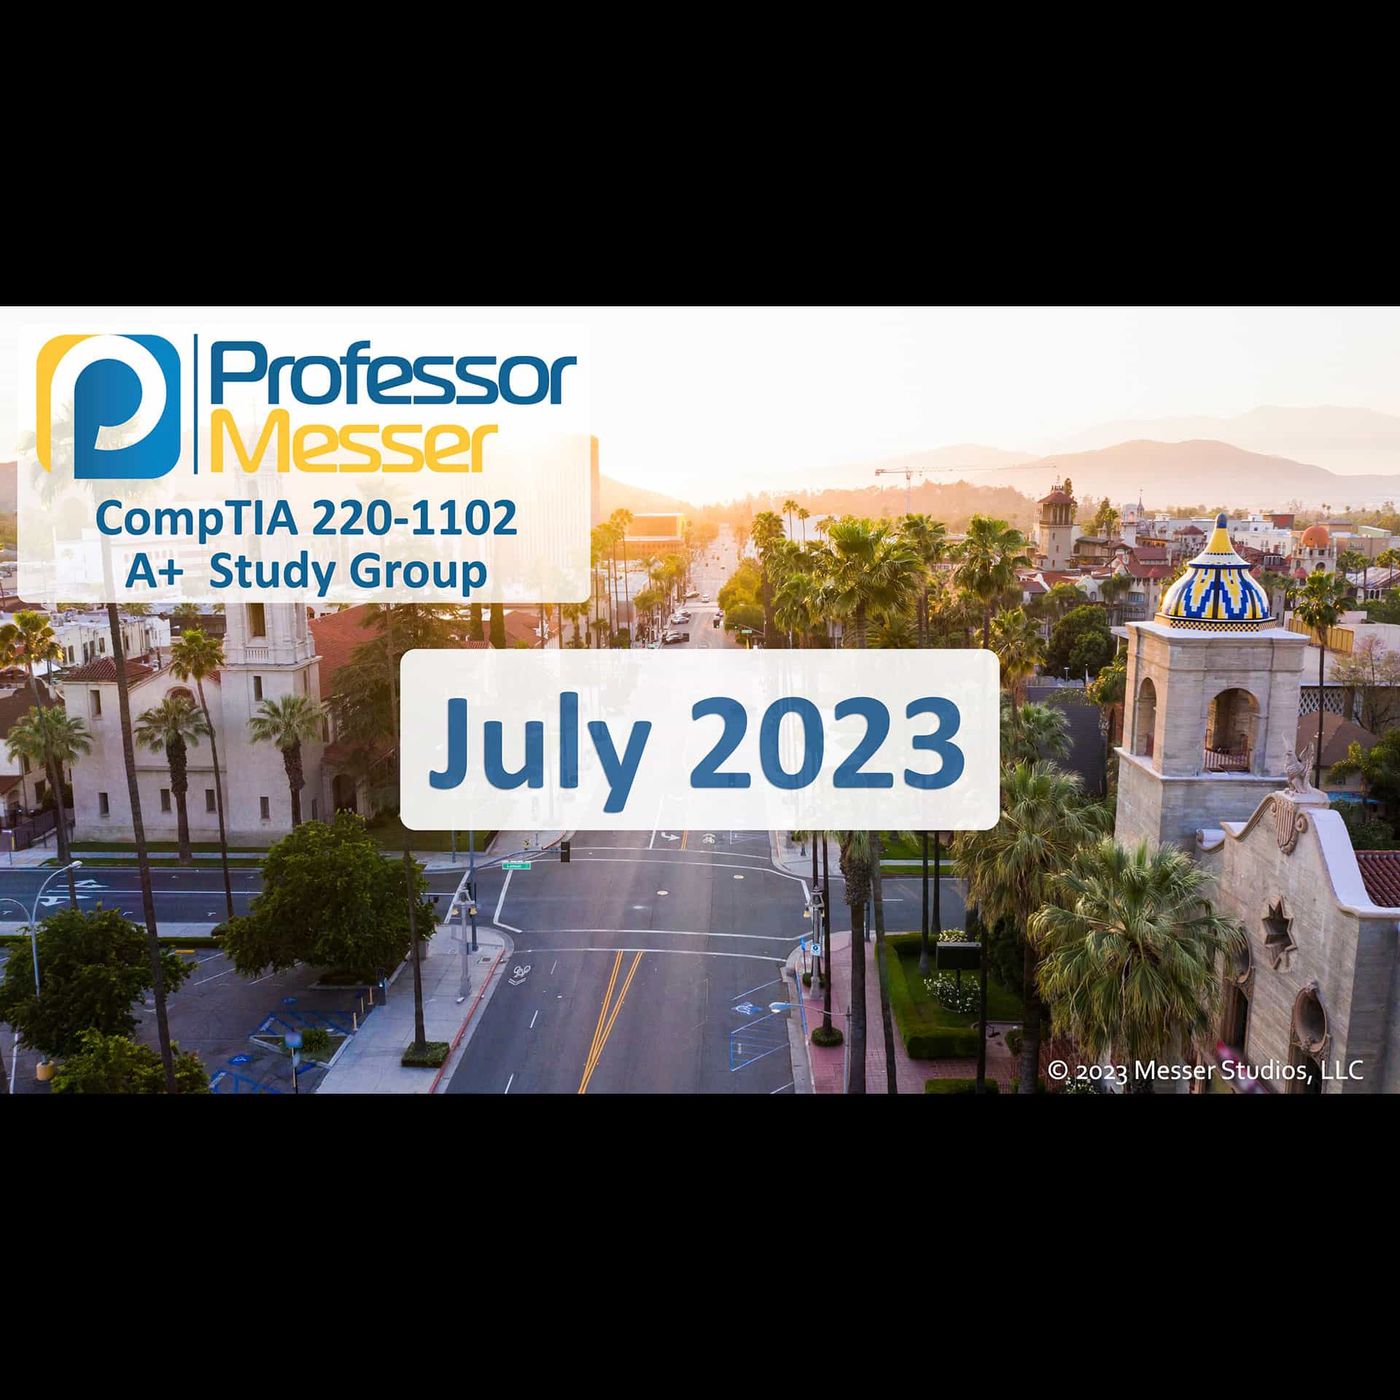 Professor Messer's CompTIA 220-1102 A+ Study Group - July 2023